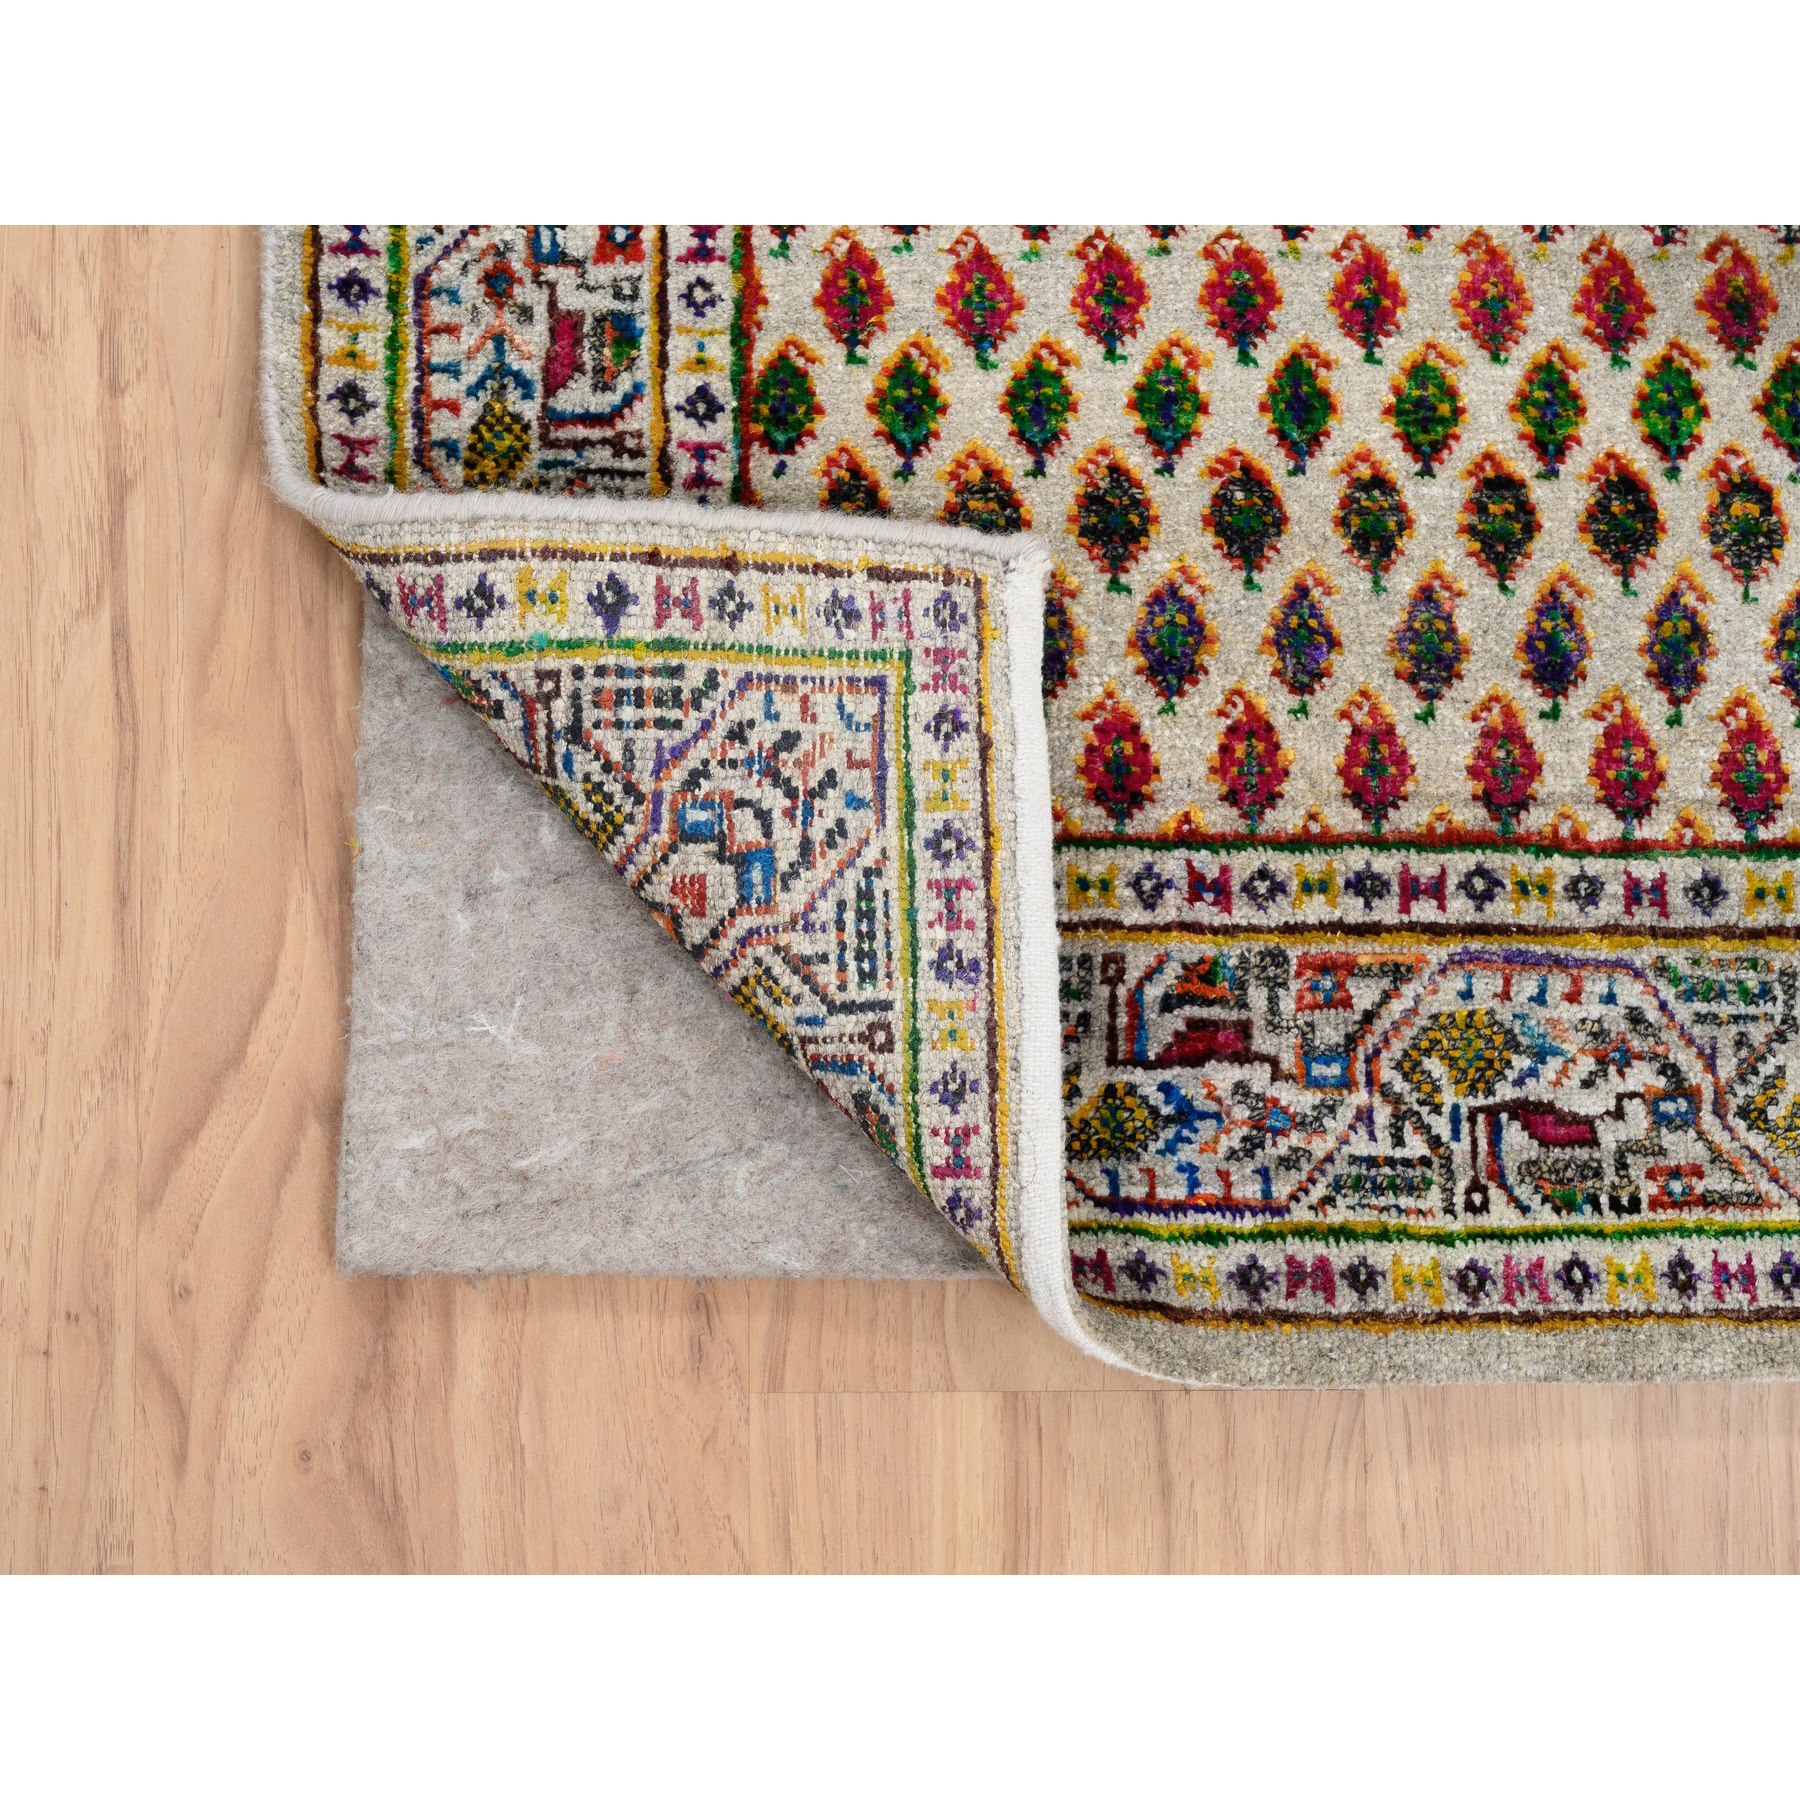 2'5"x12' Beige Sarouk Mir Inspired With Repetitive Boteh Design Colorful Wool And Sari Silk Hand Woven Oriental Runner Rug 